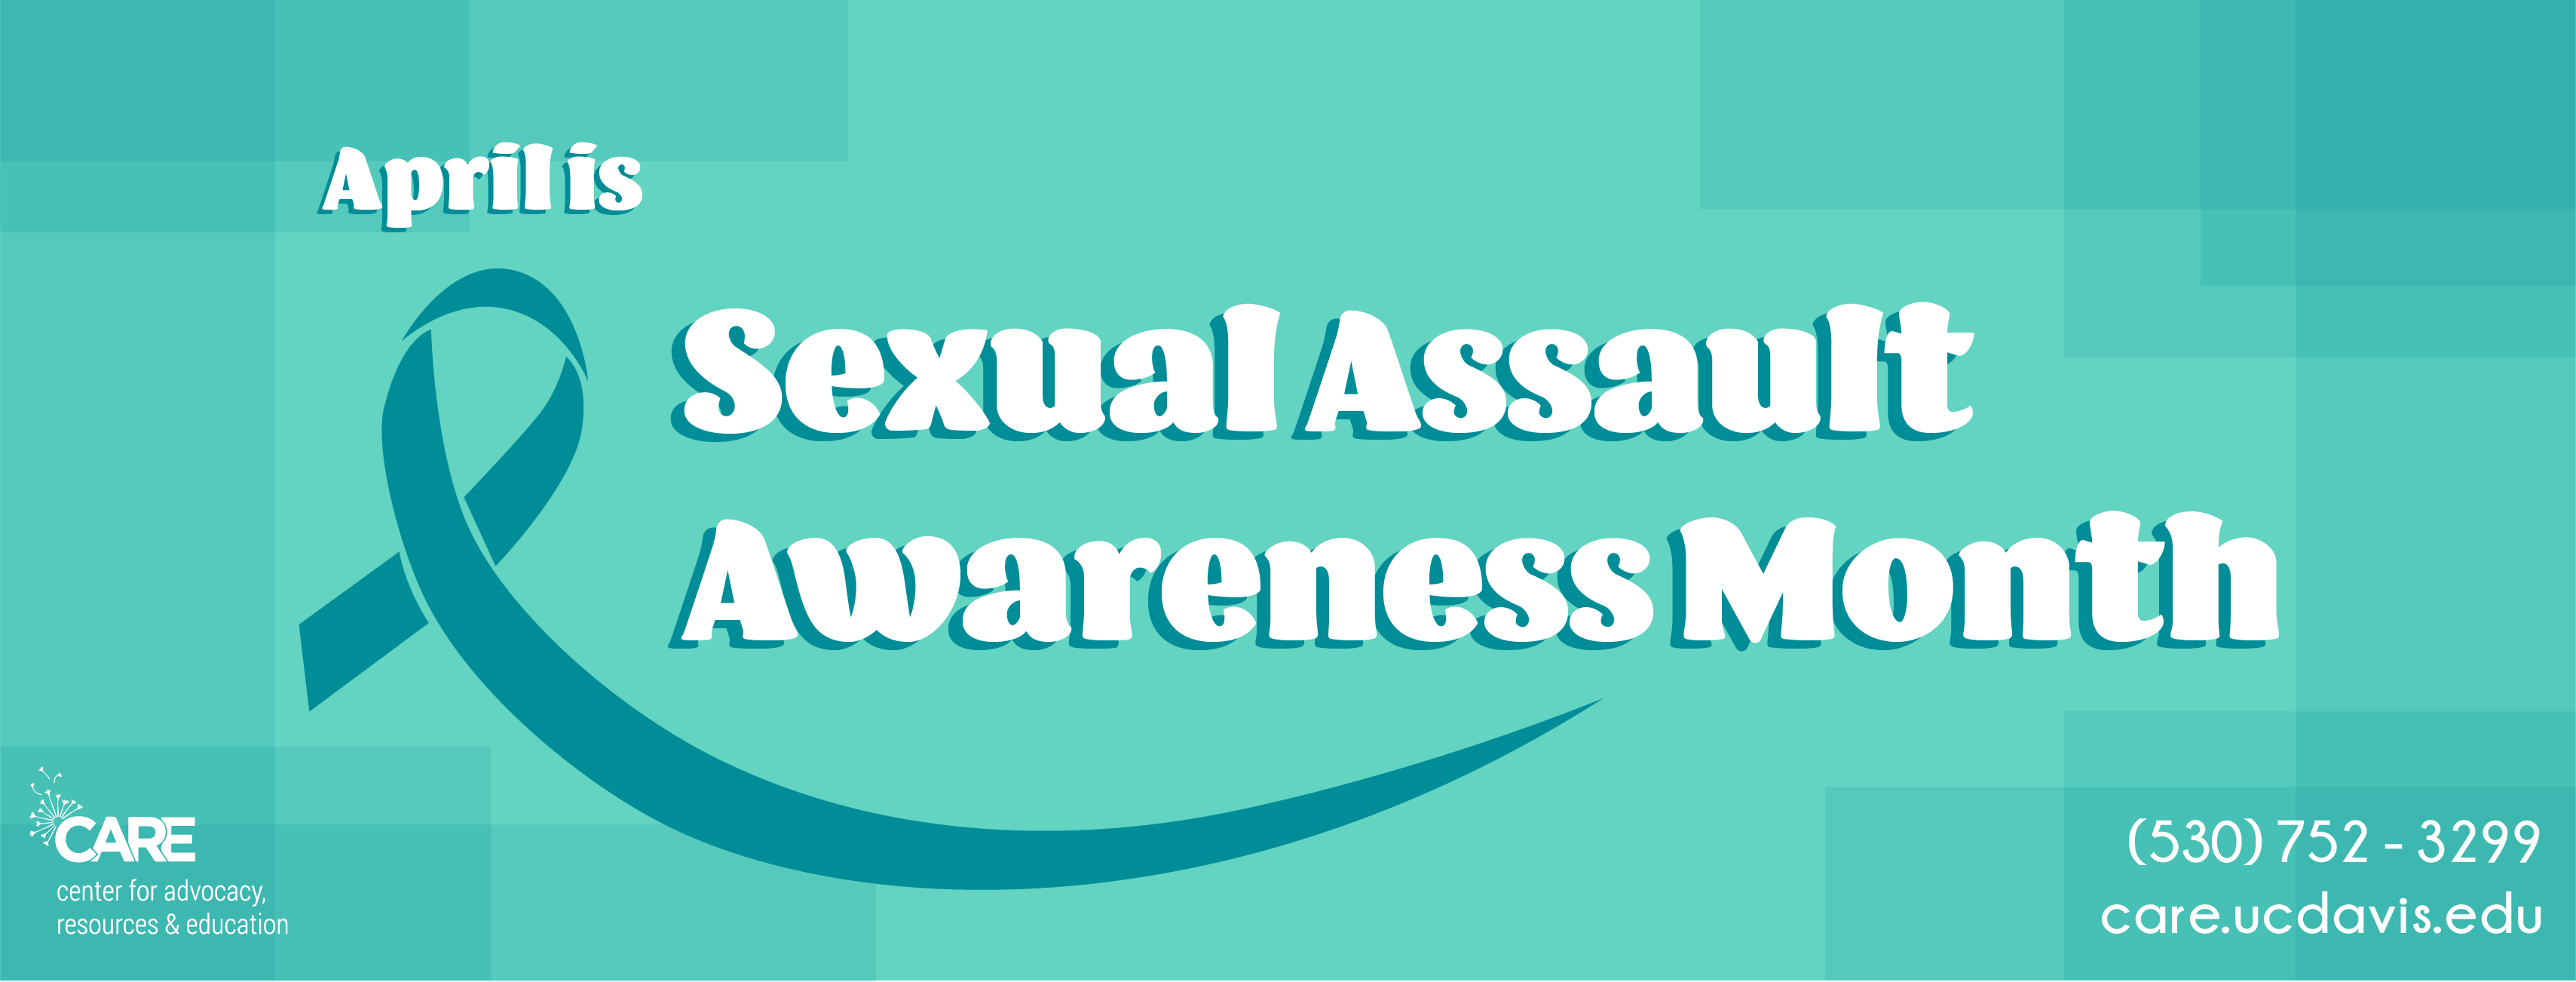 A graphic with a light teal background says “April is Sexual Assault Awareness Month’ in white text. A dark teal ribbon is on the left. In the bottom left corner, “CARE center for advocacy, resources & education” in white text. In the bottom right corner “(530) 752-3299 care.ucdavis.edu” in white text. 